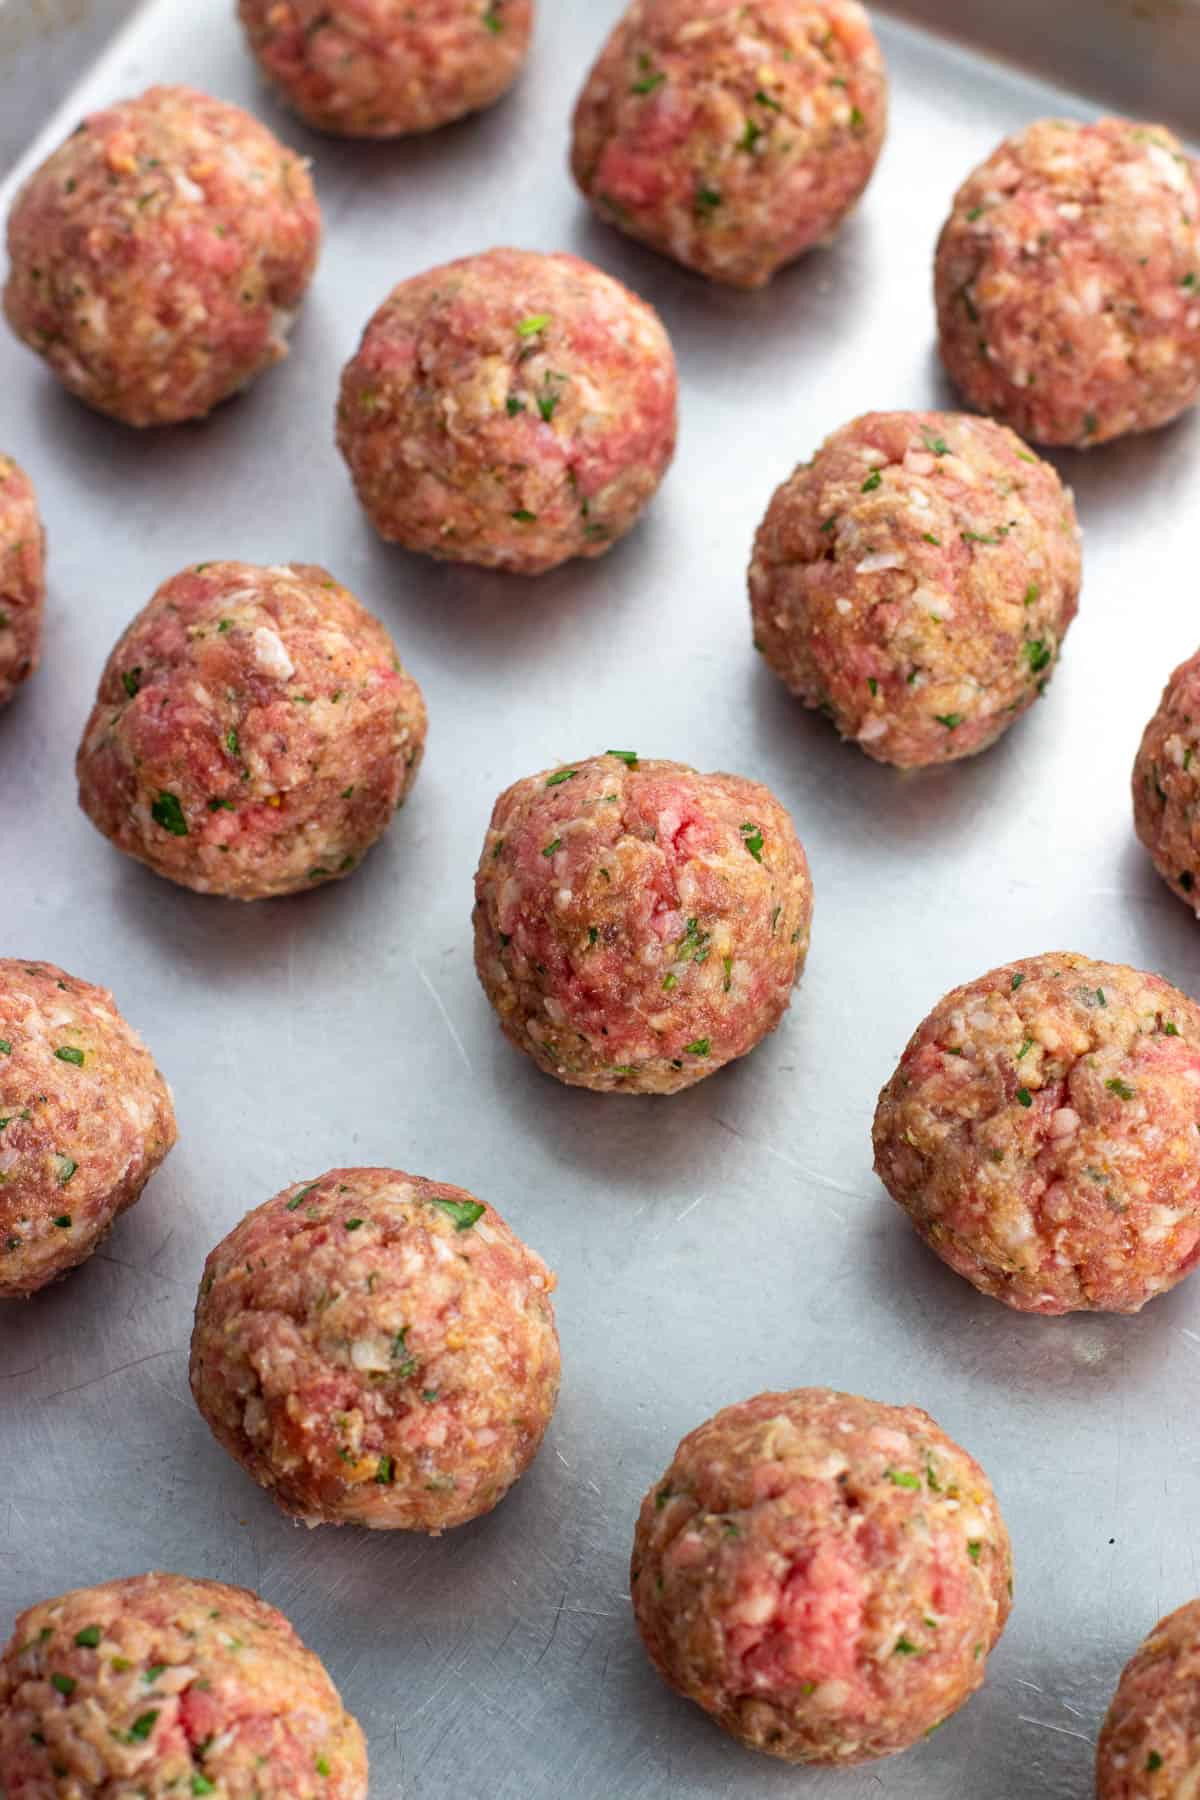 Rolled raw meatballs on a sheet pan.